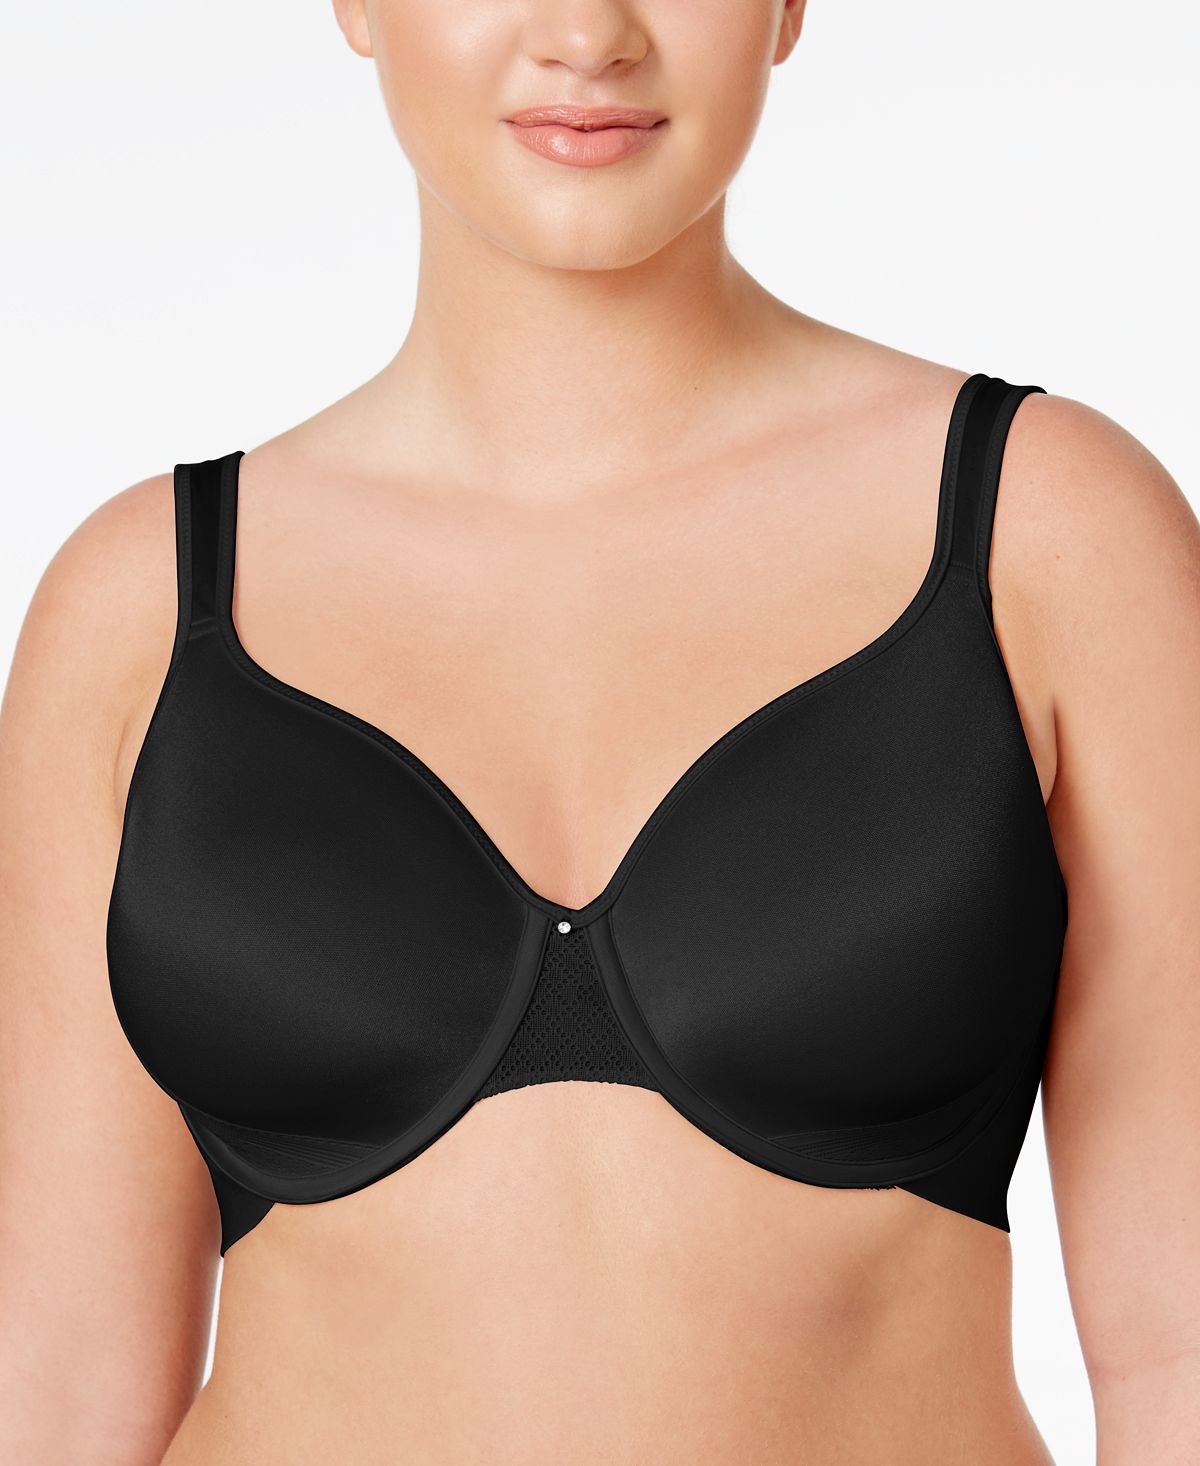 Playtex Love My Curves Full Coverage Perfect Life Underwire Bra S520 Black